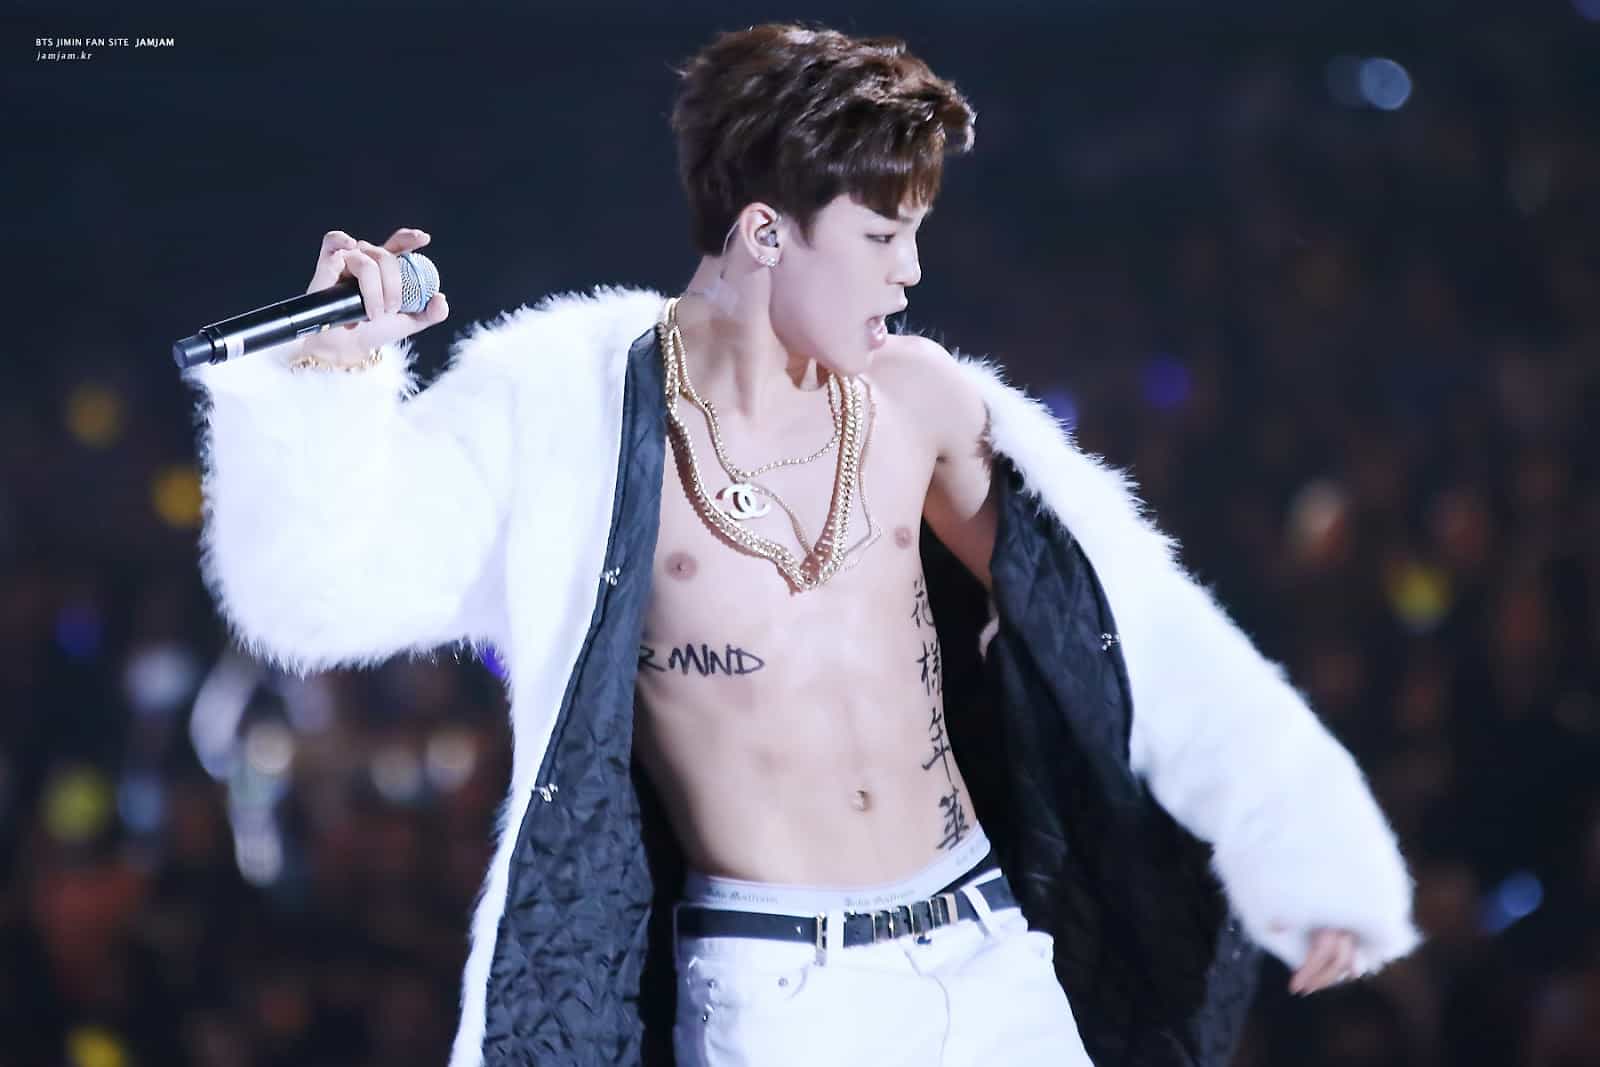 HOT] KPOP Idols With Abs That Will Make Your Heart Flutter - Kimchislap.com